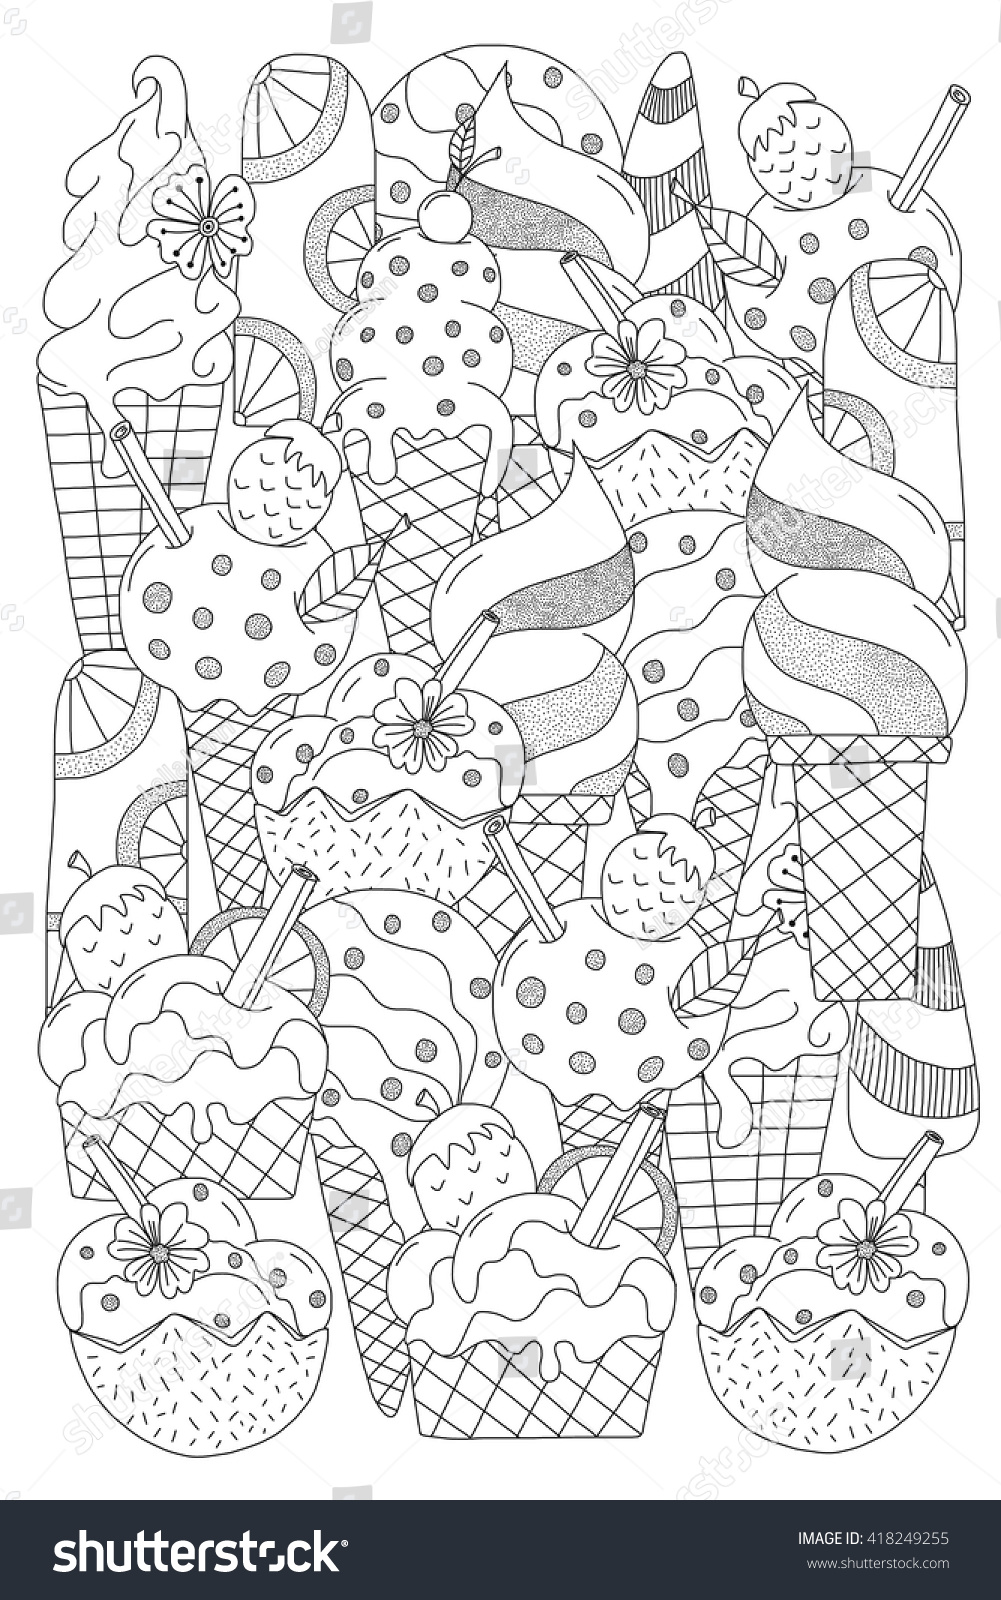 19 Ice Cream Coloring Pages For Adults - Printable Coloring Pages